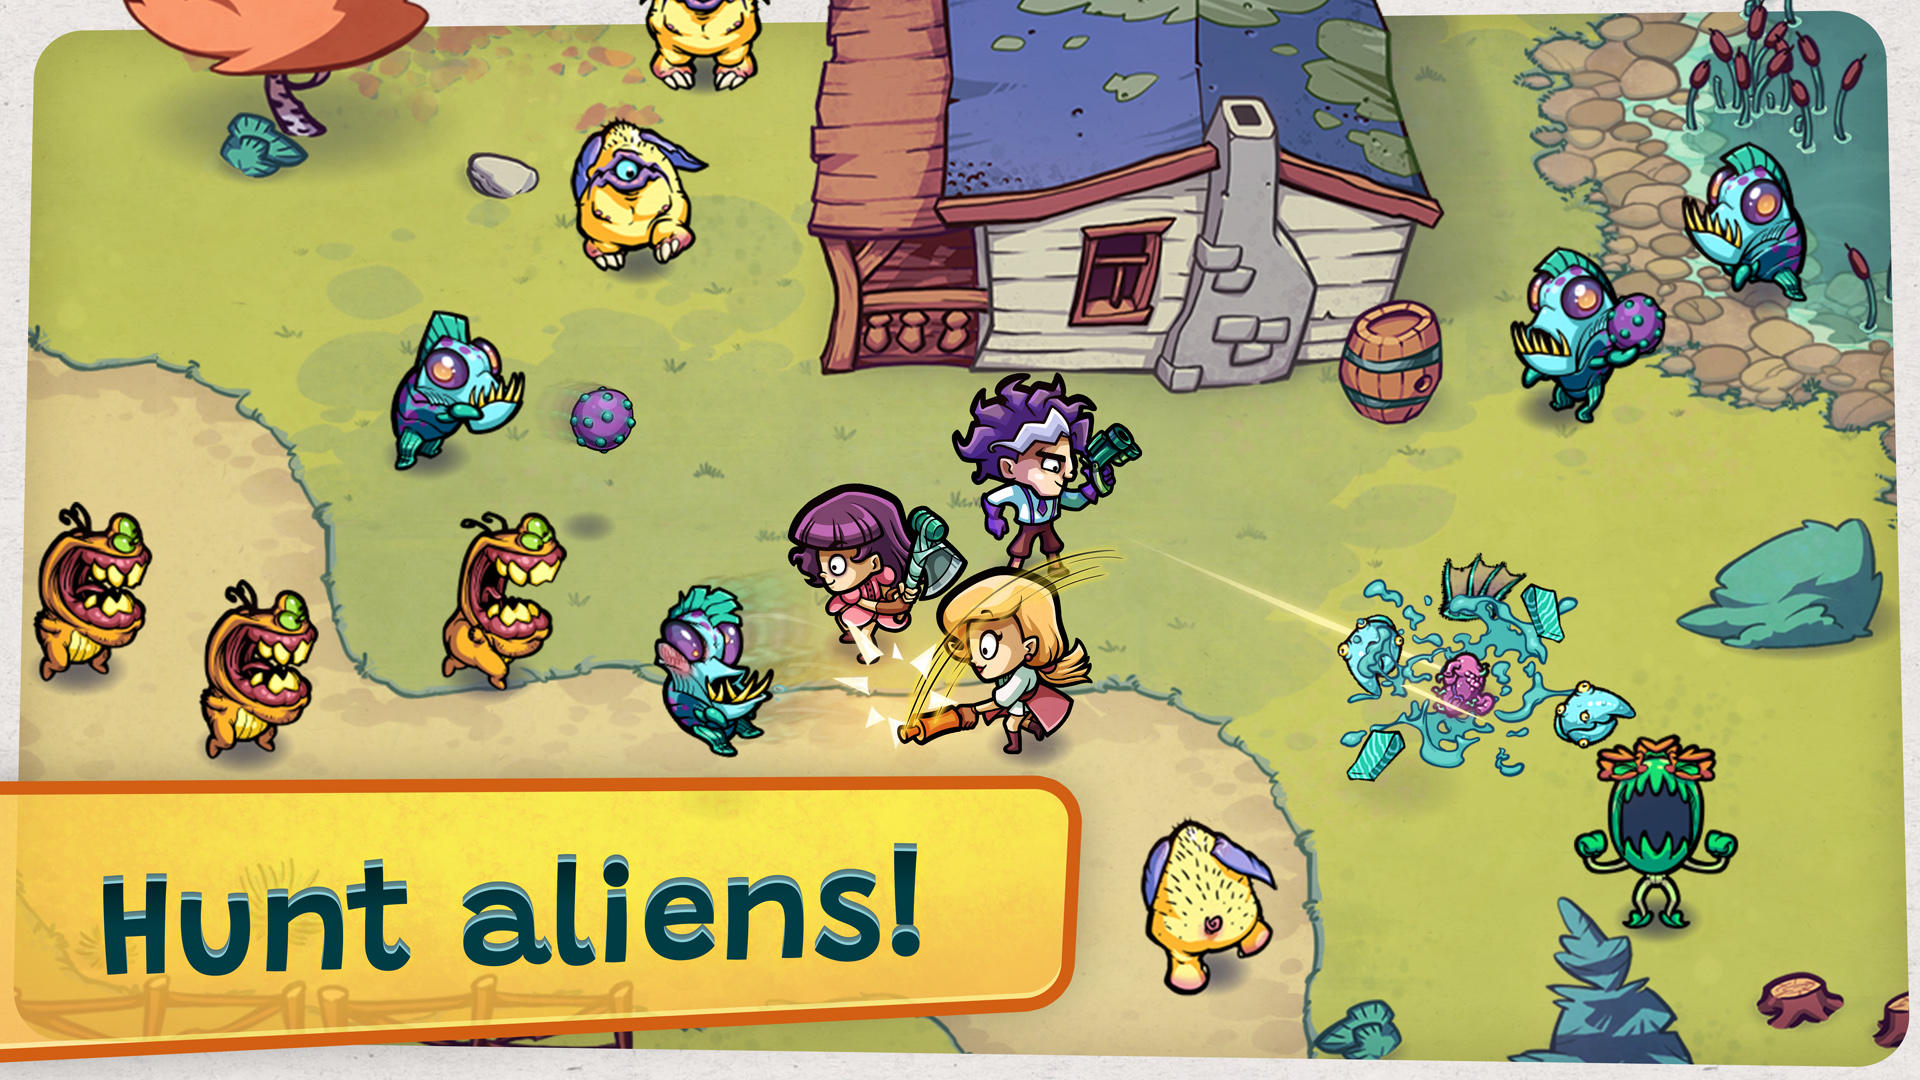 Screenshot 1 of Invasion alimentaire extraterrestre 1.2.10